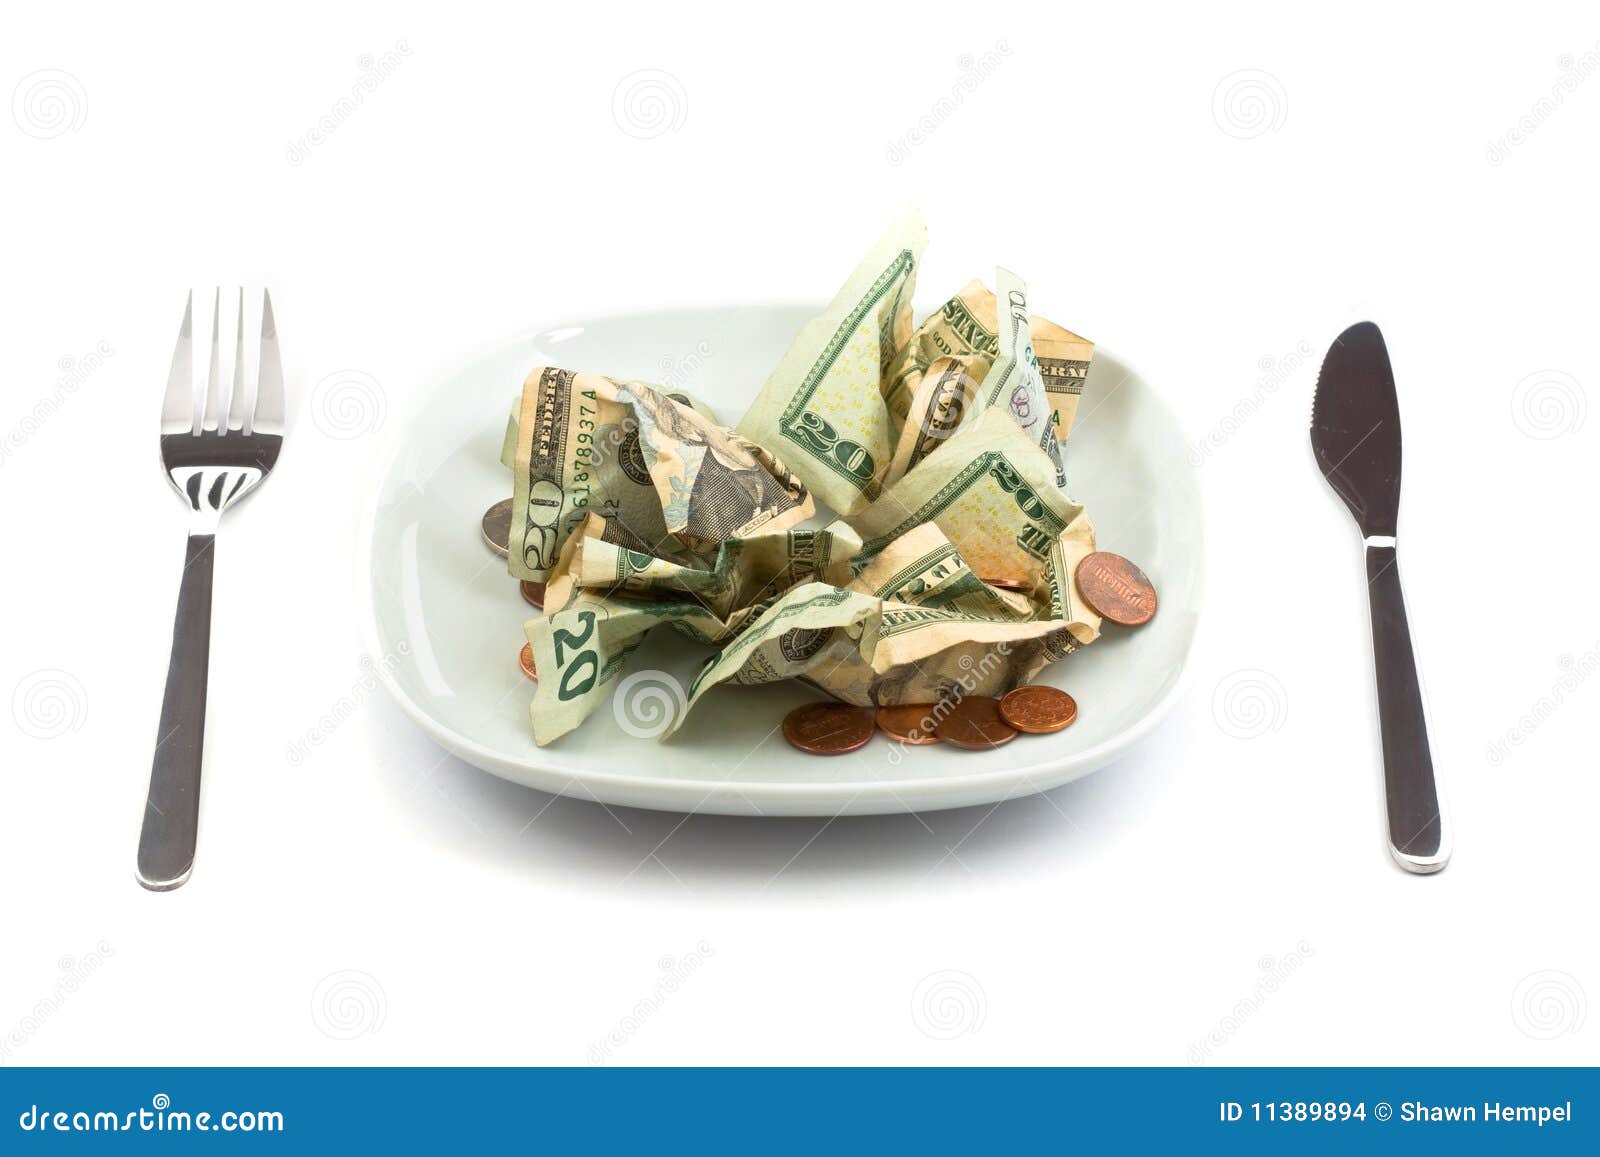 Money Salad With Dressing Of Coins Stock Images - Image: 11389894